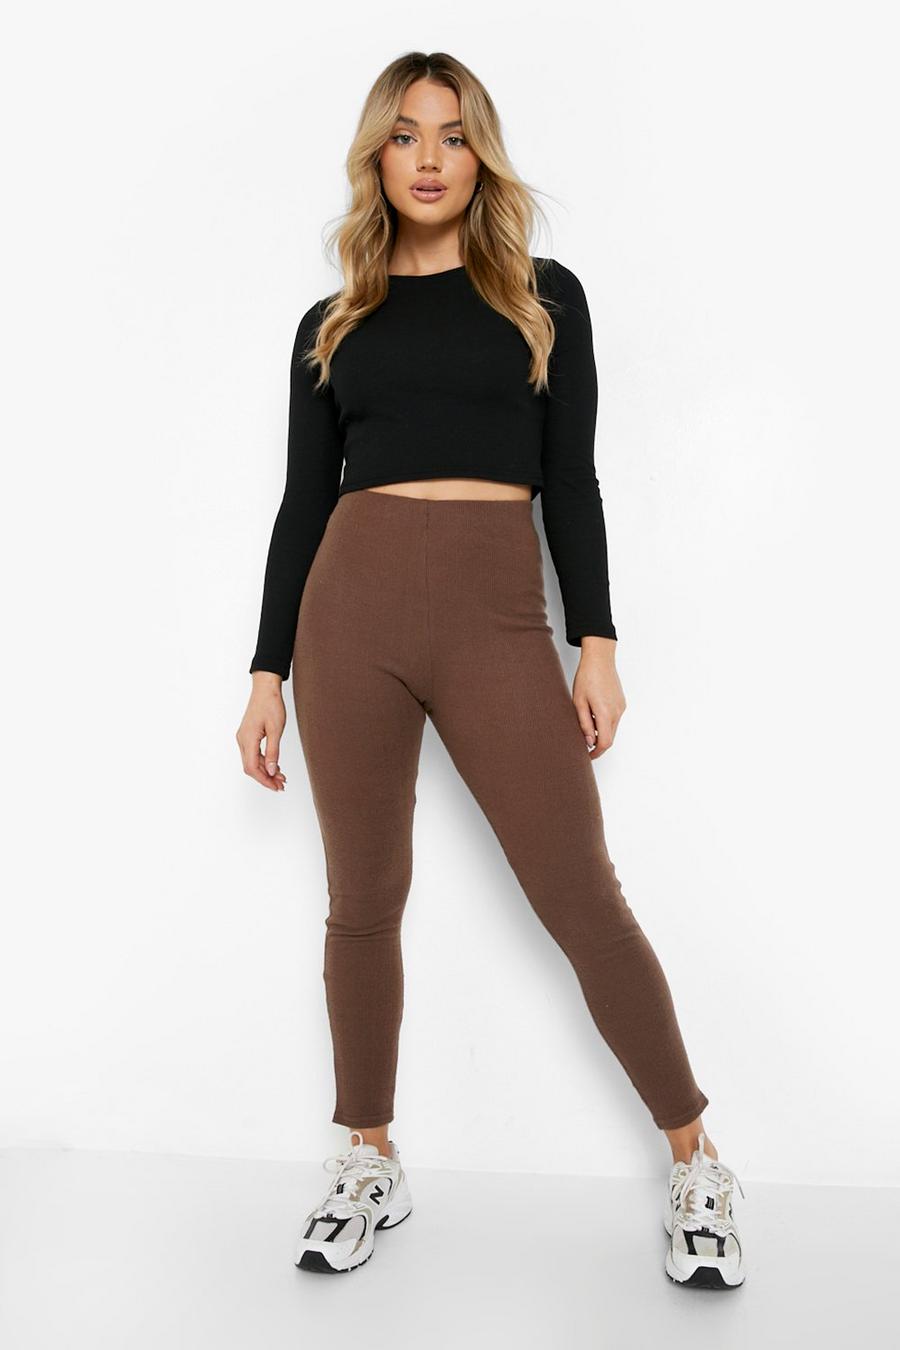 Chocolate brown Fluffy Knit Leggings